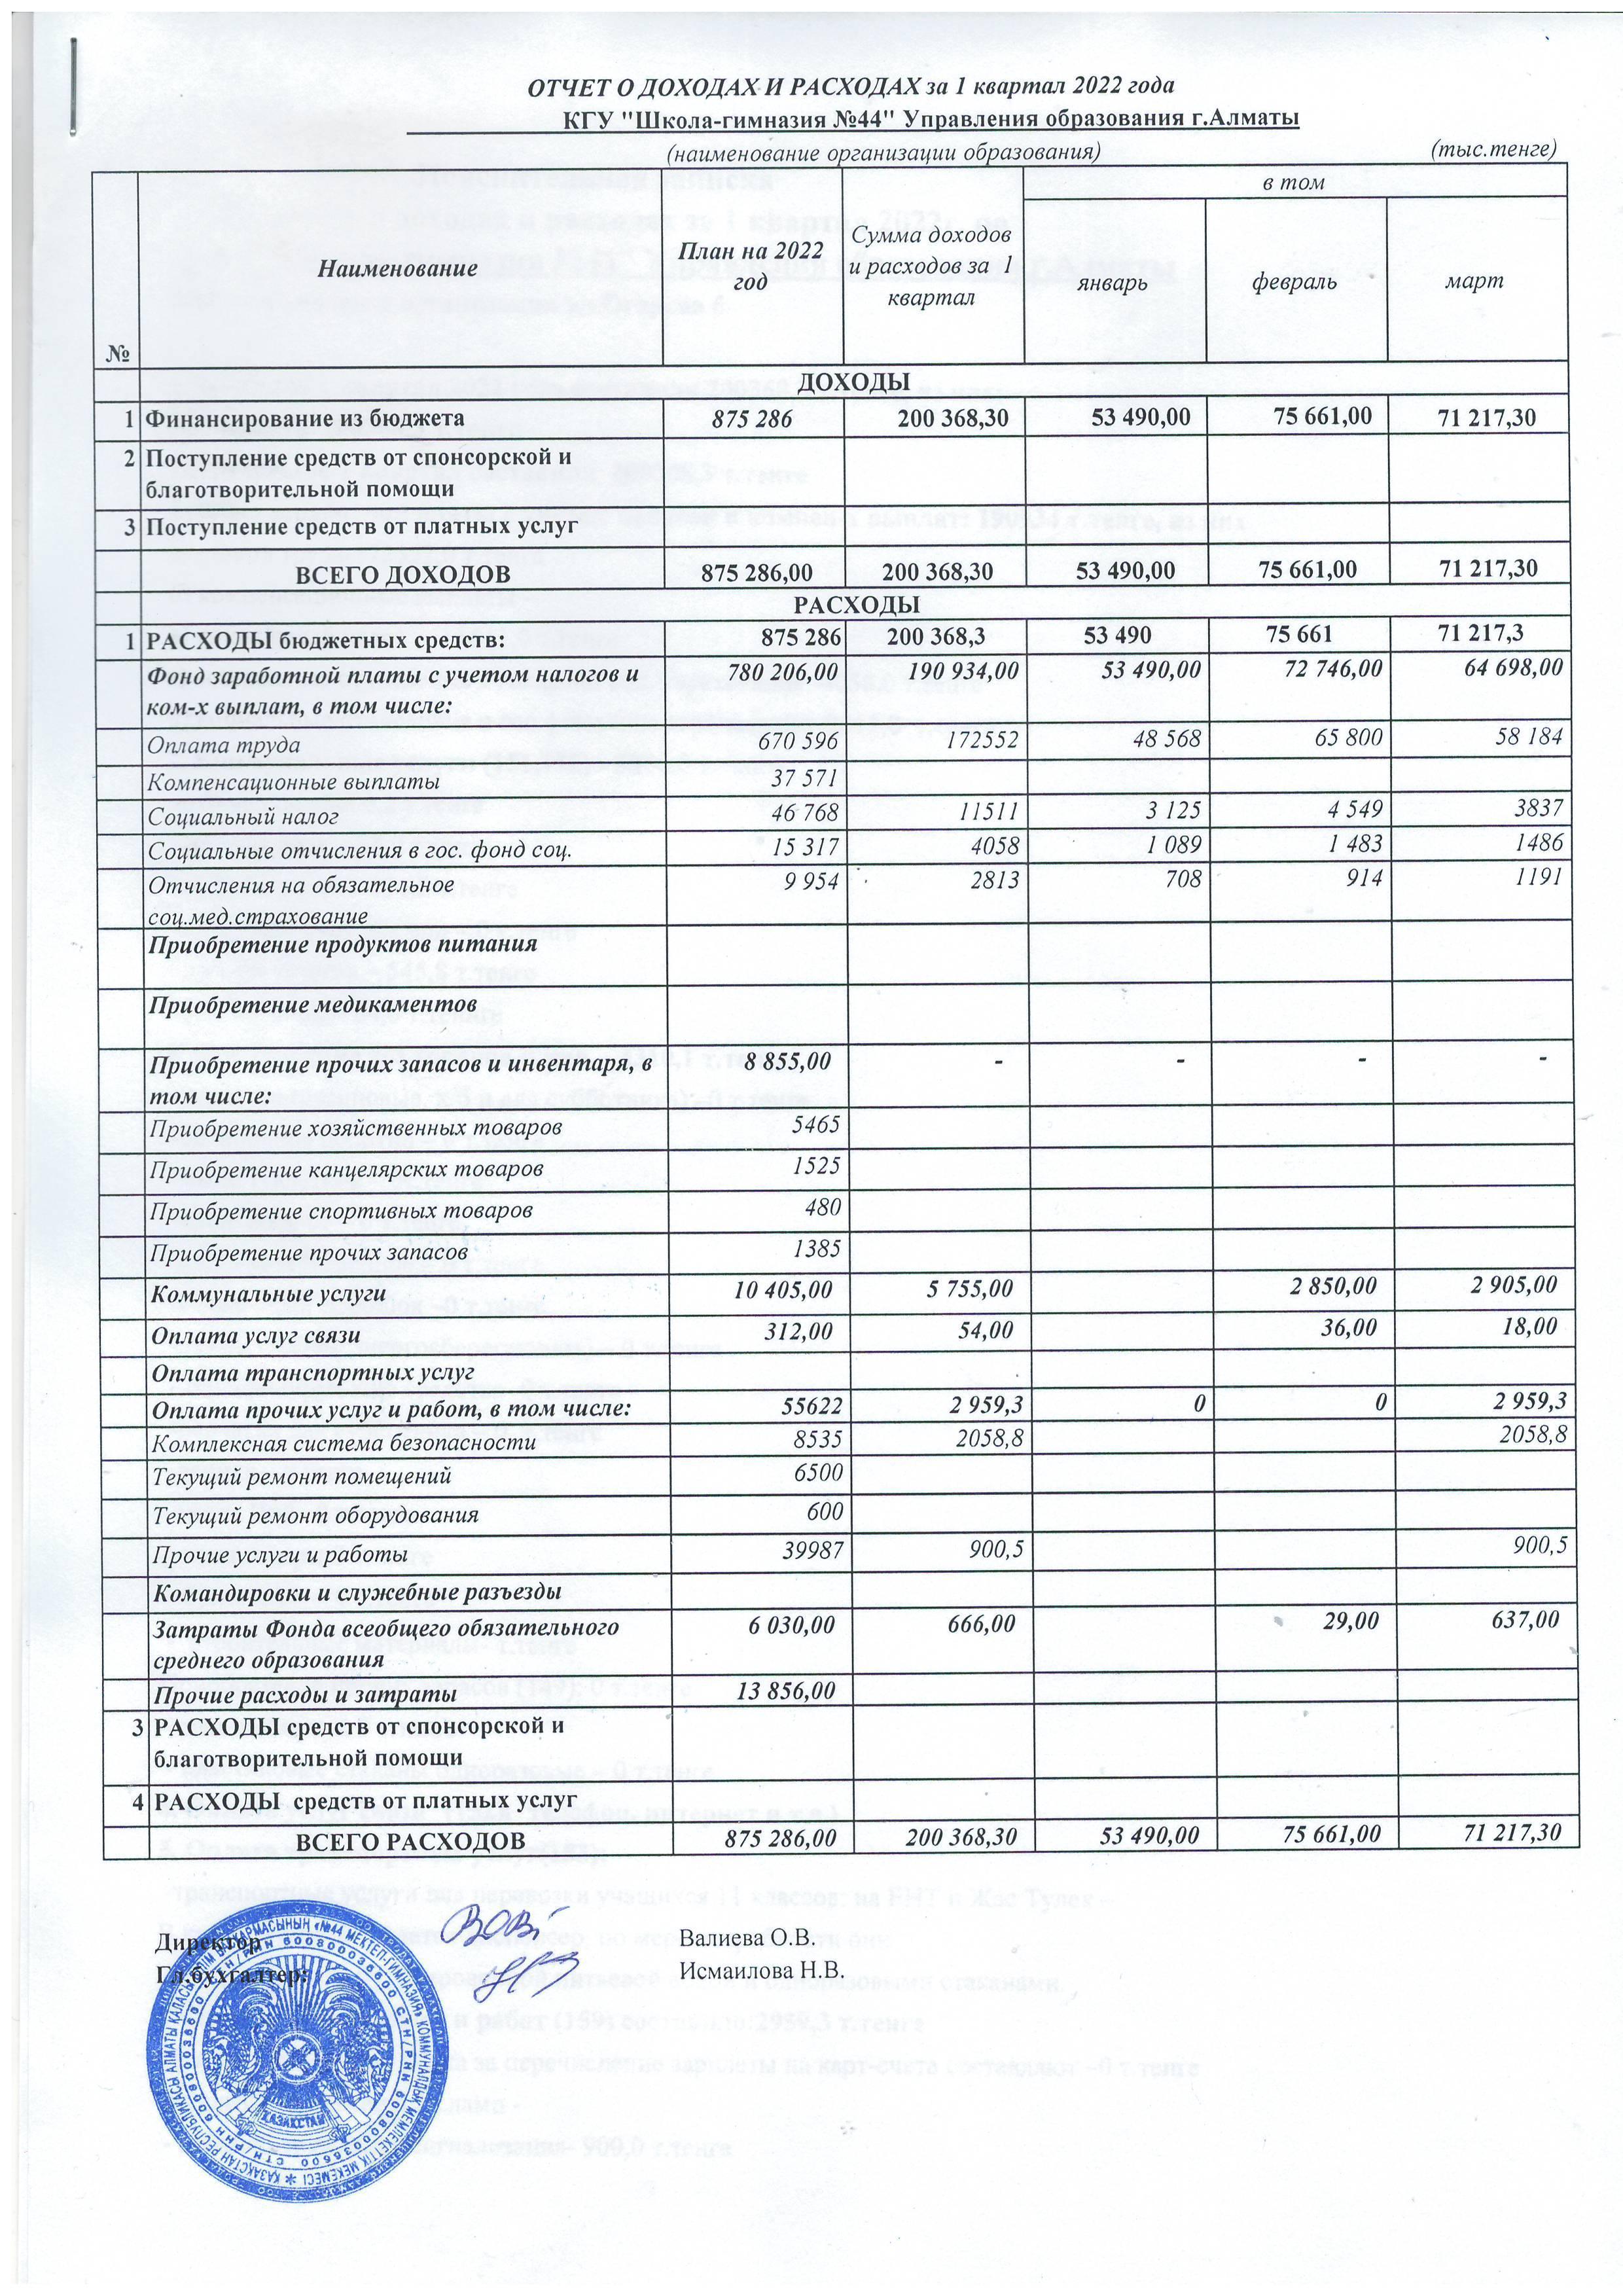 Statement of income and expenses за 1 квартал 2022 г